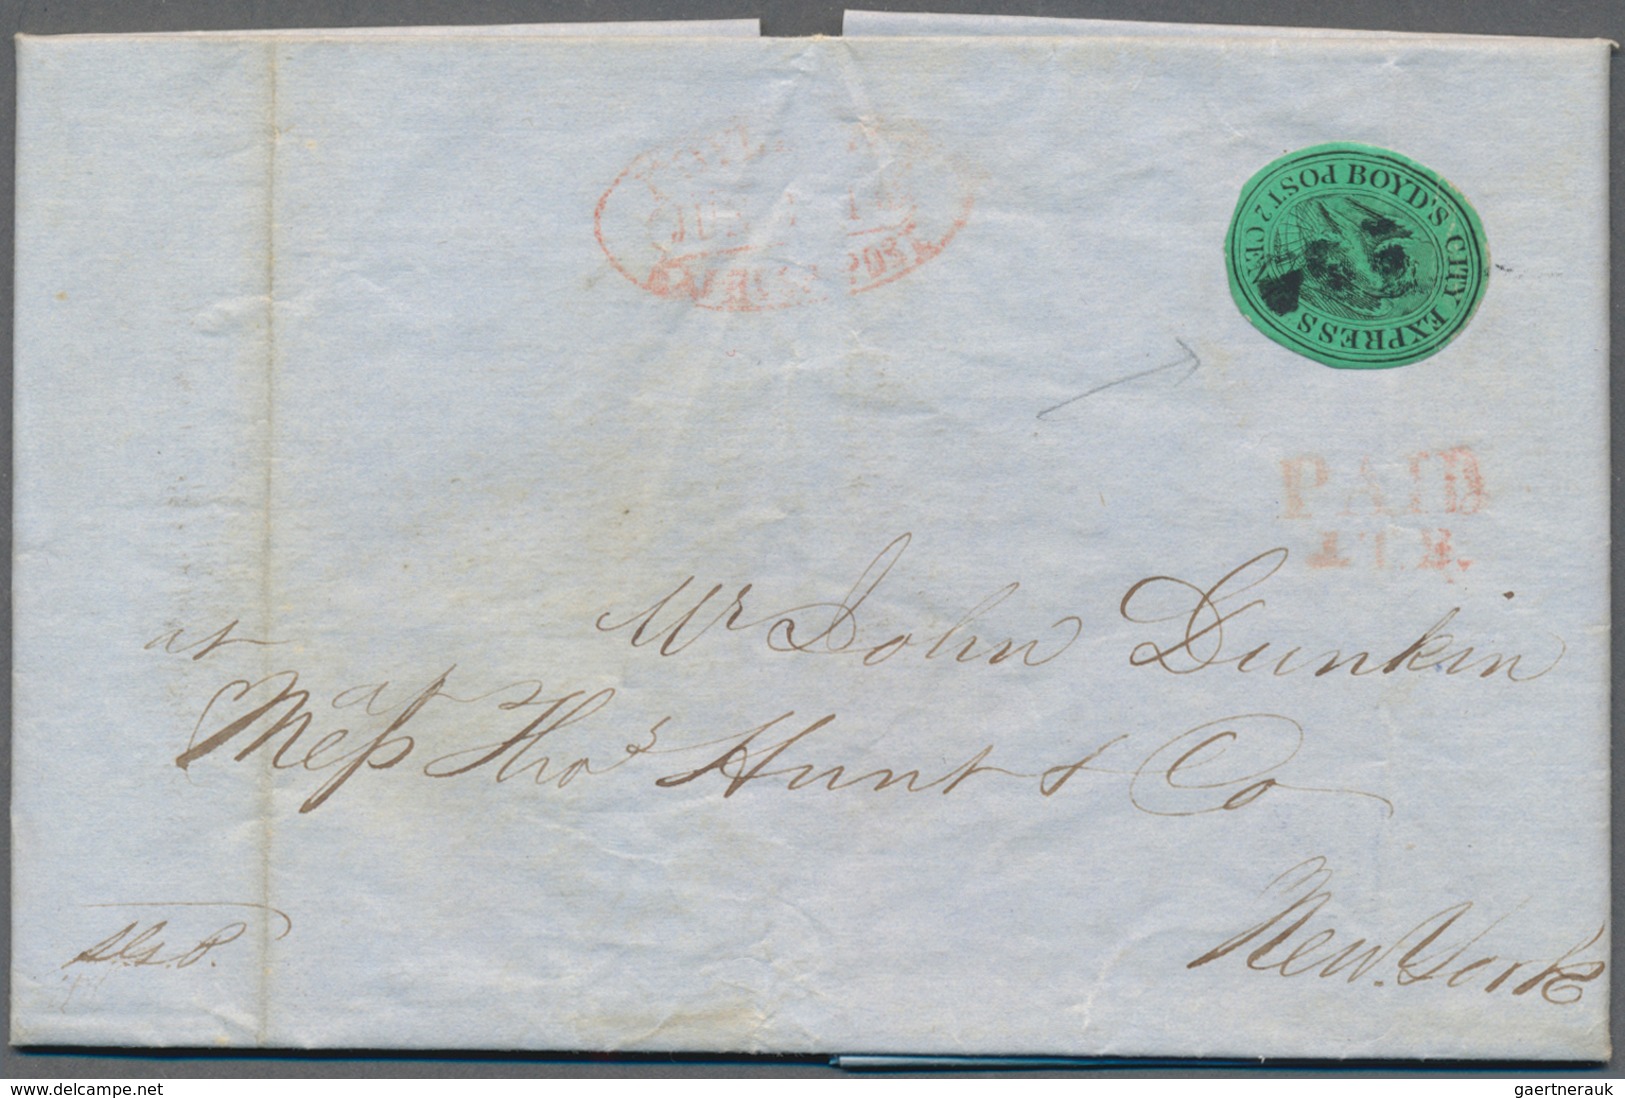 Vereinigte Staaten von Amerika: 1838 as of, about 80 partly better covers, e.g. 12 c Presidents (MiN